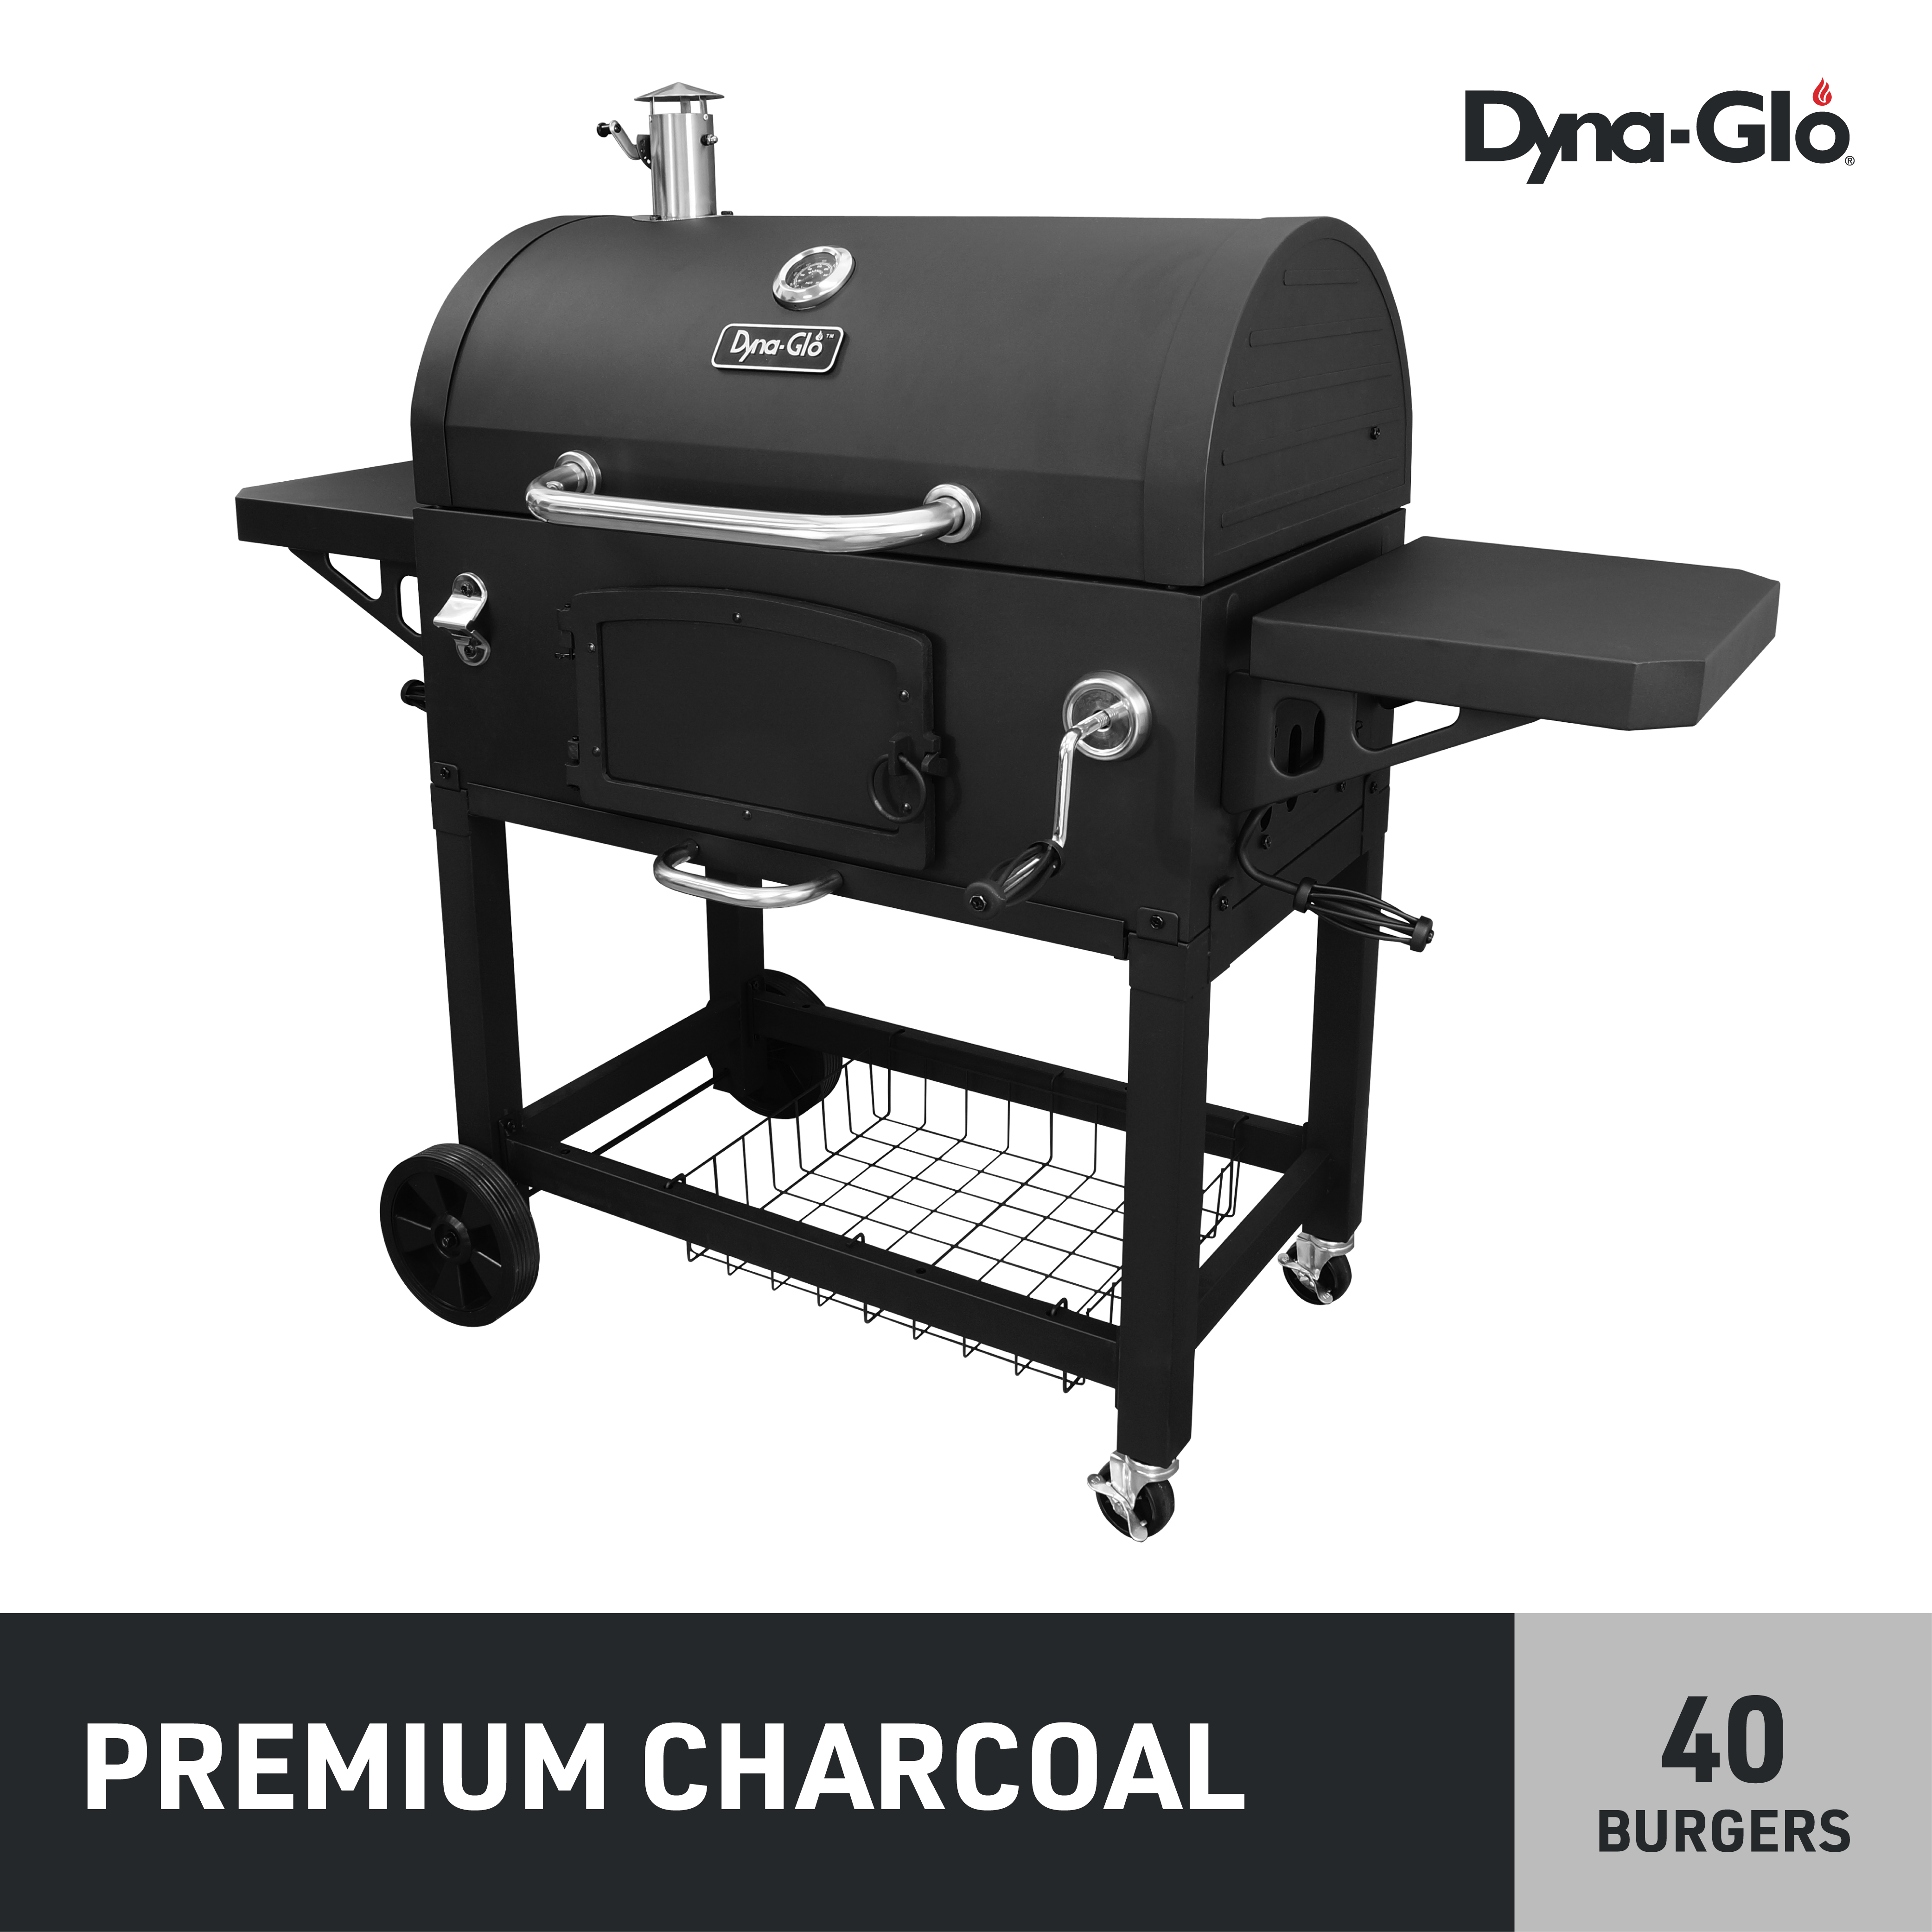 Dyna-Glo X-Large Heavy-Duty Charcoal Grill - 32 in. W- 816 sq.in. of Cooking Area Black - image 1 of 12